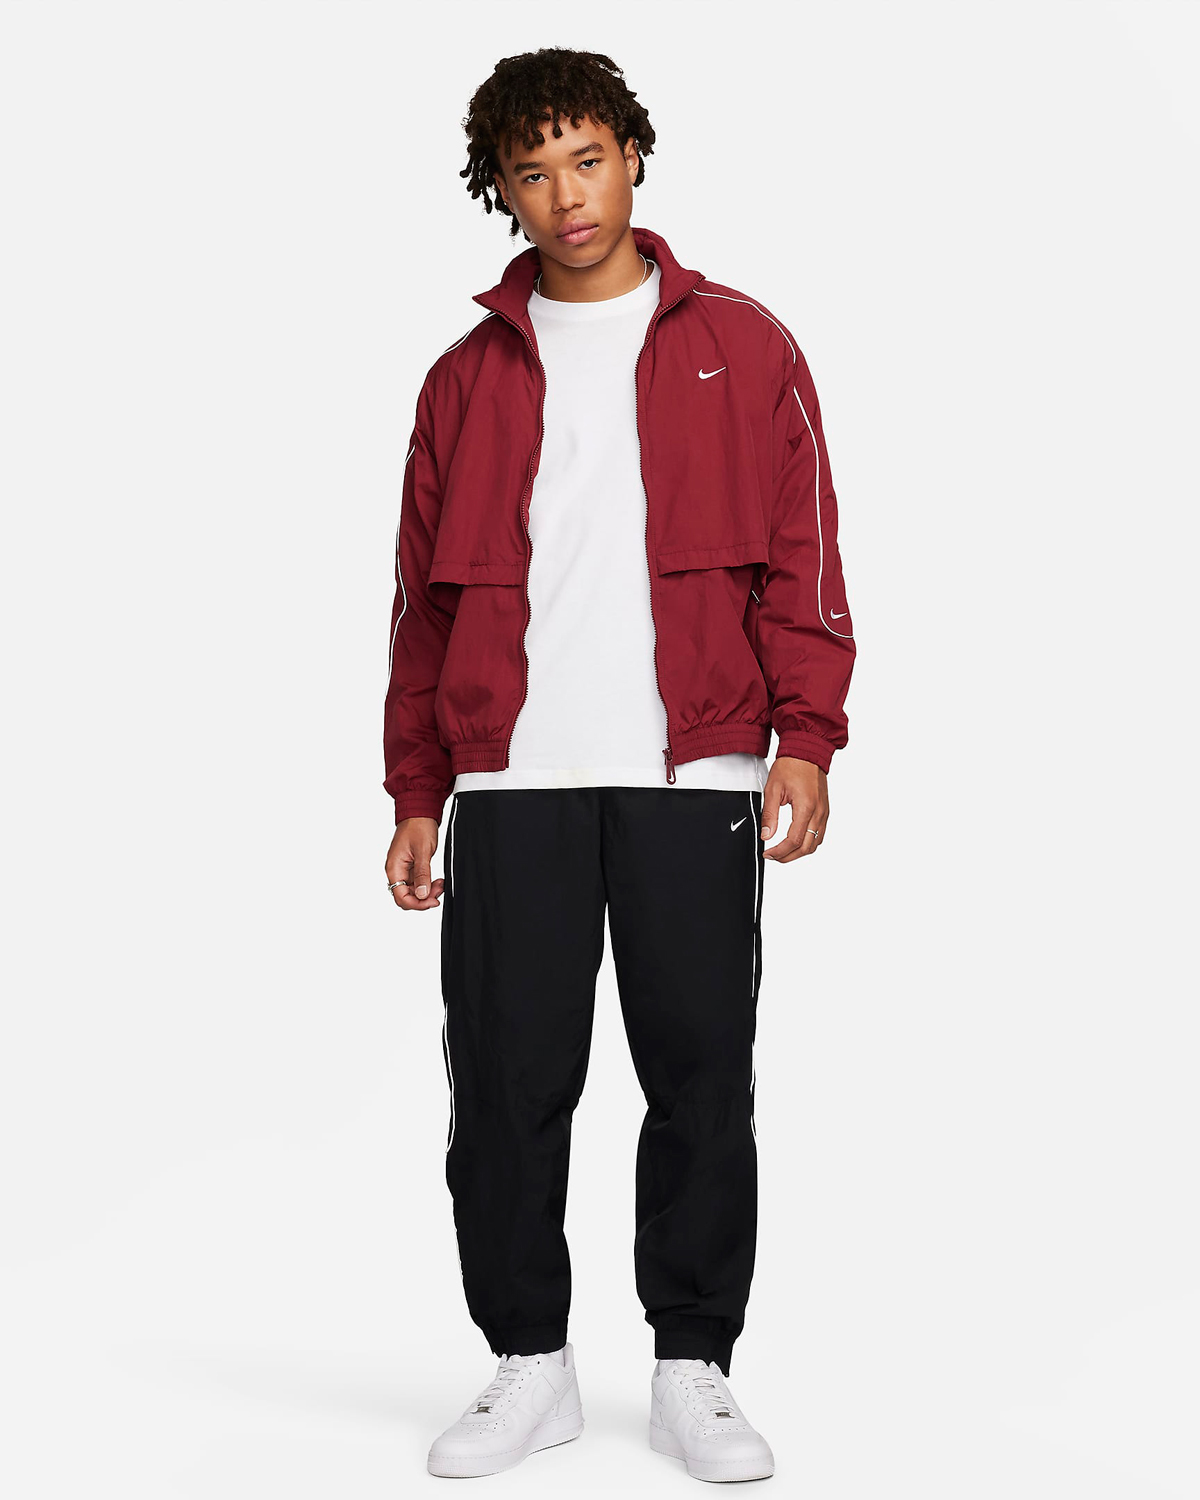 Nike-Solo-Swoosh-Woven-Track-Jacket-Team-Red-Outfit